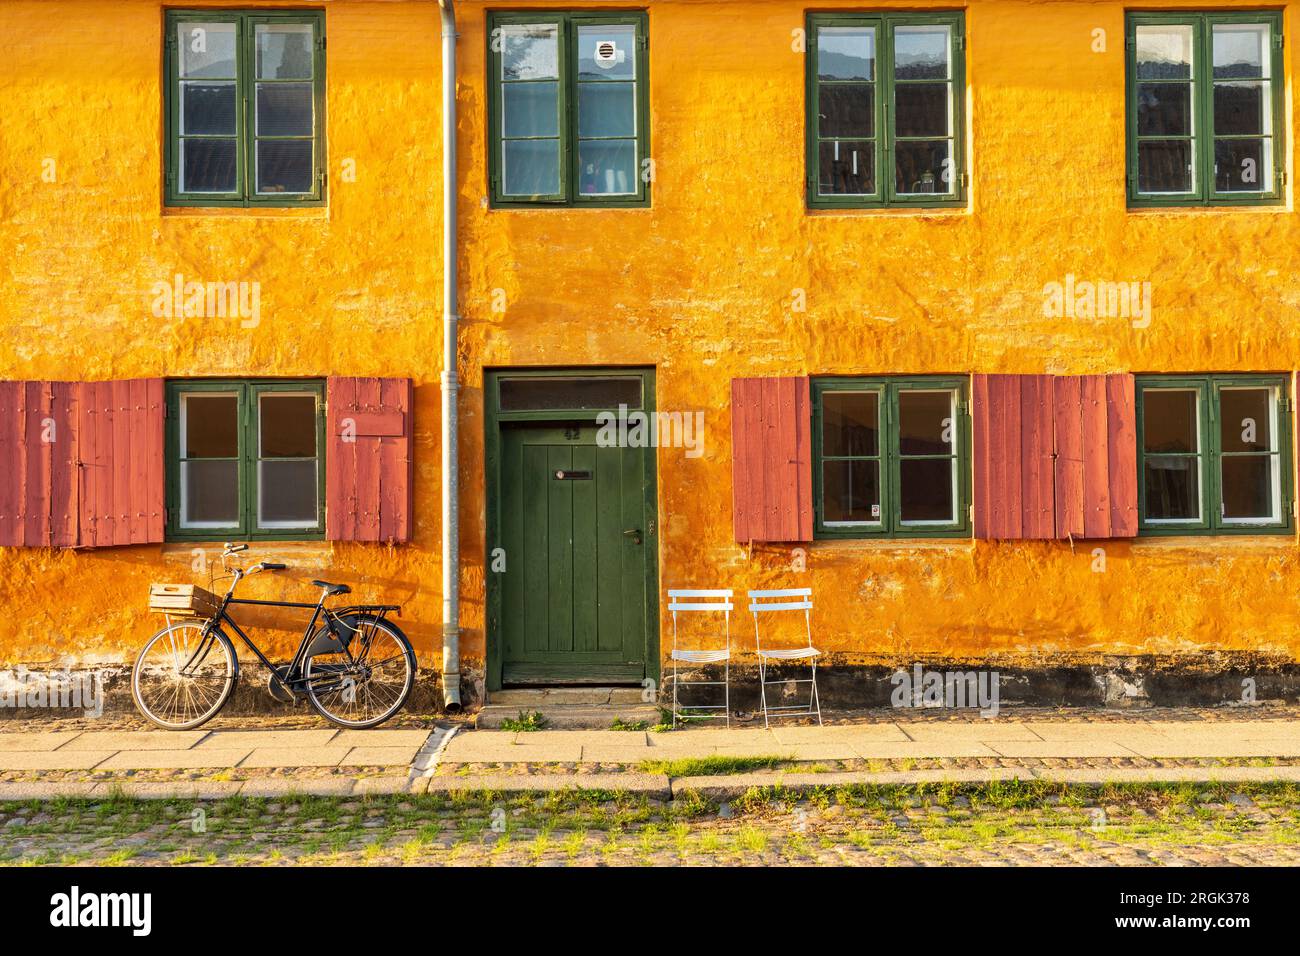 Colorful old wall with bicycle Stock Photo